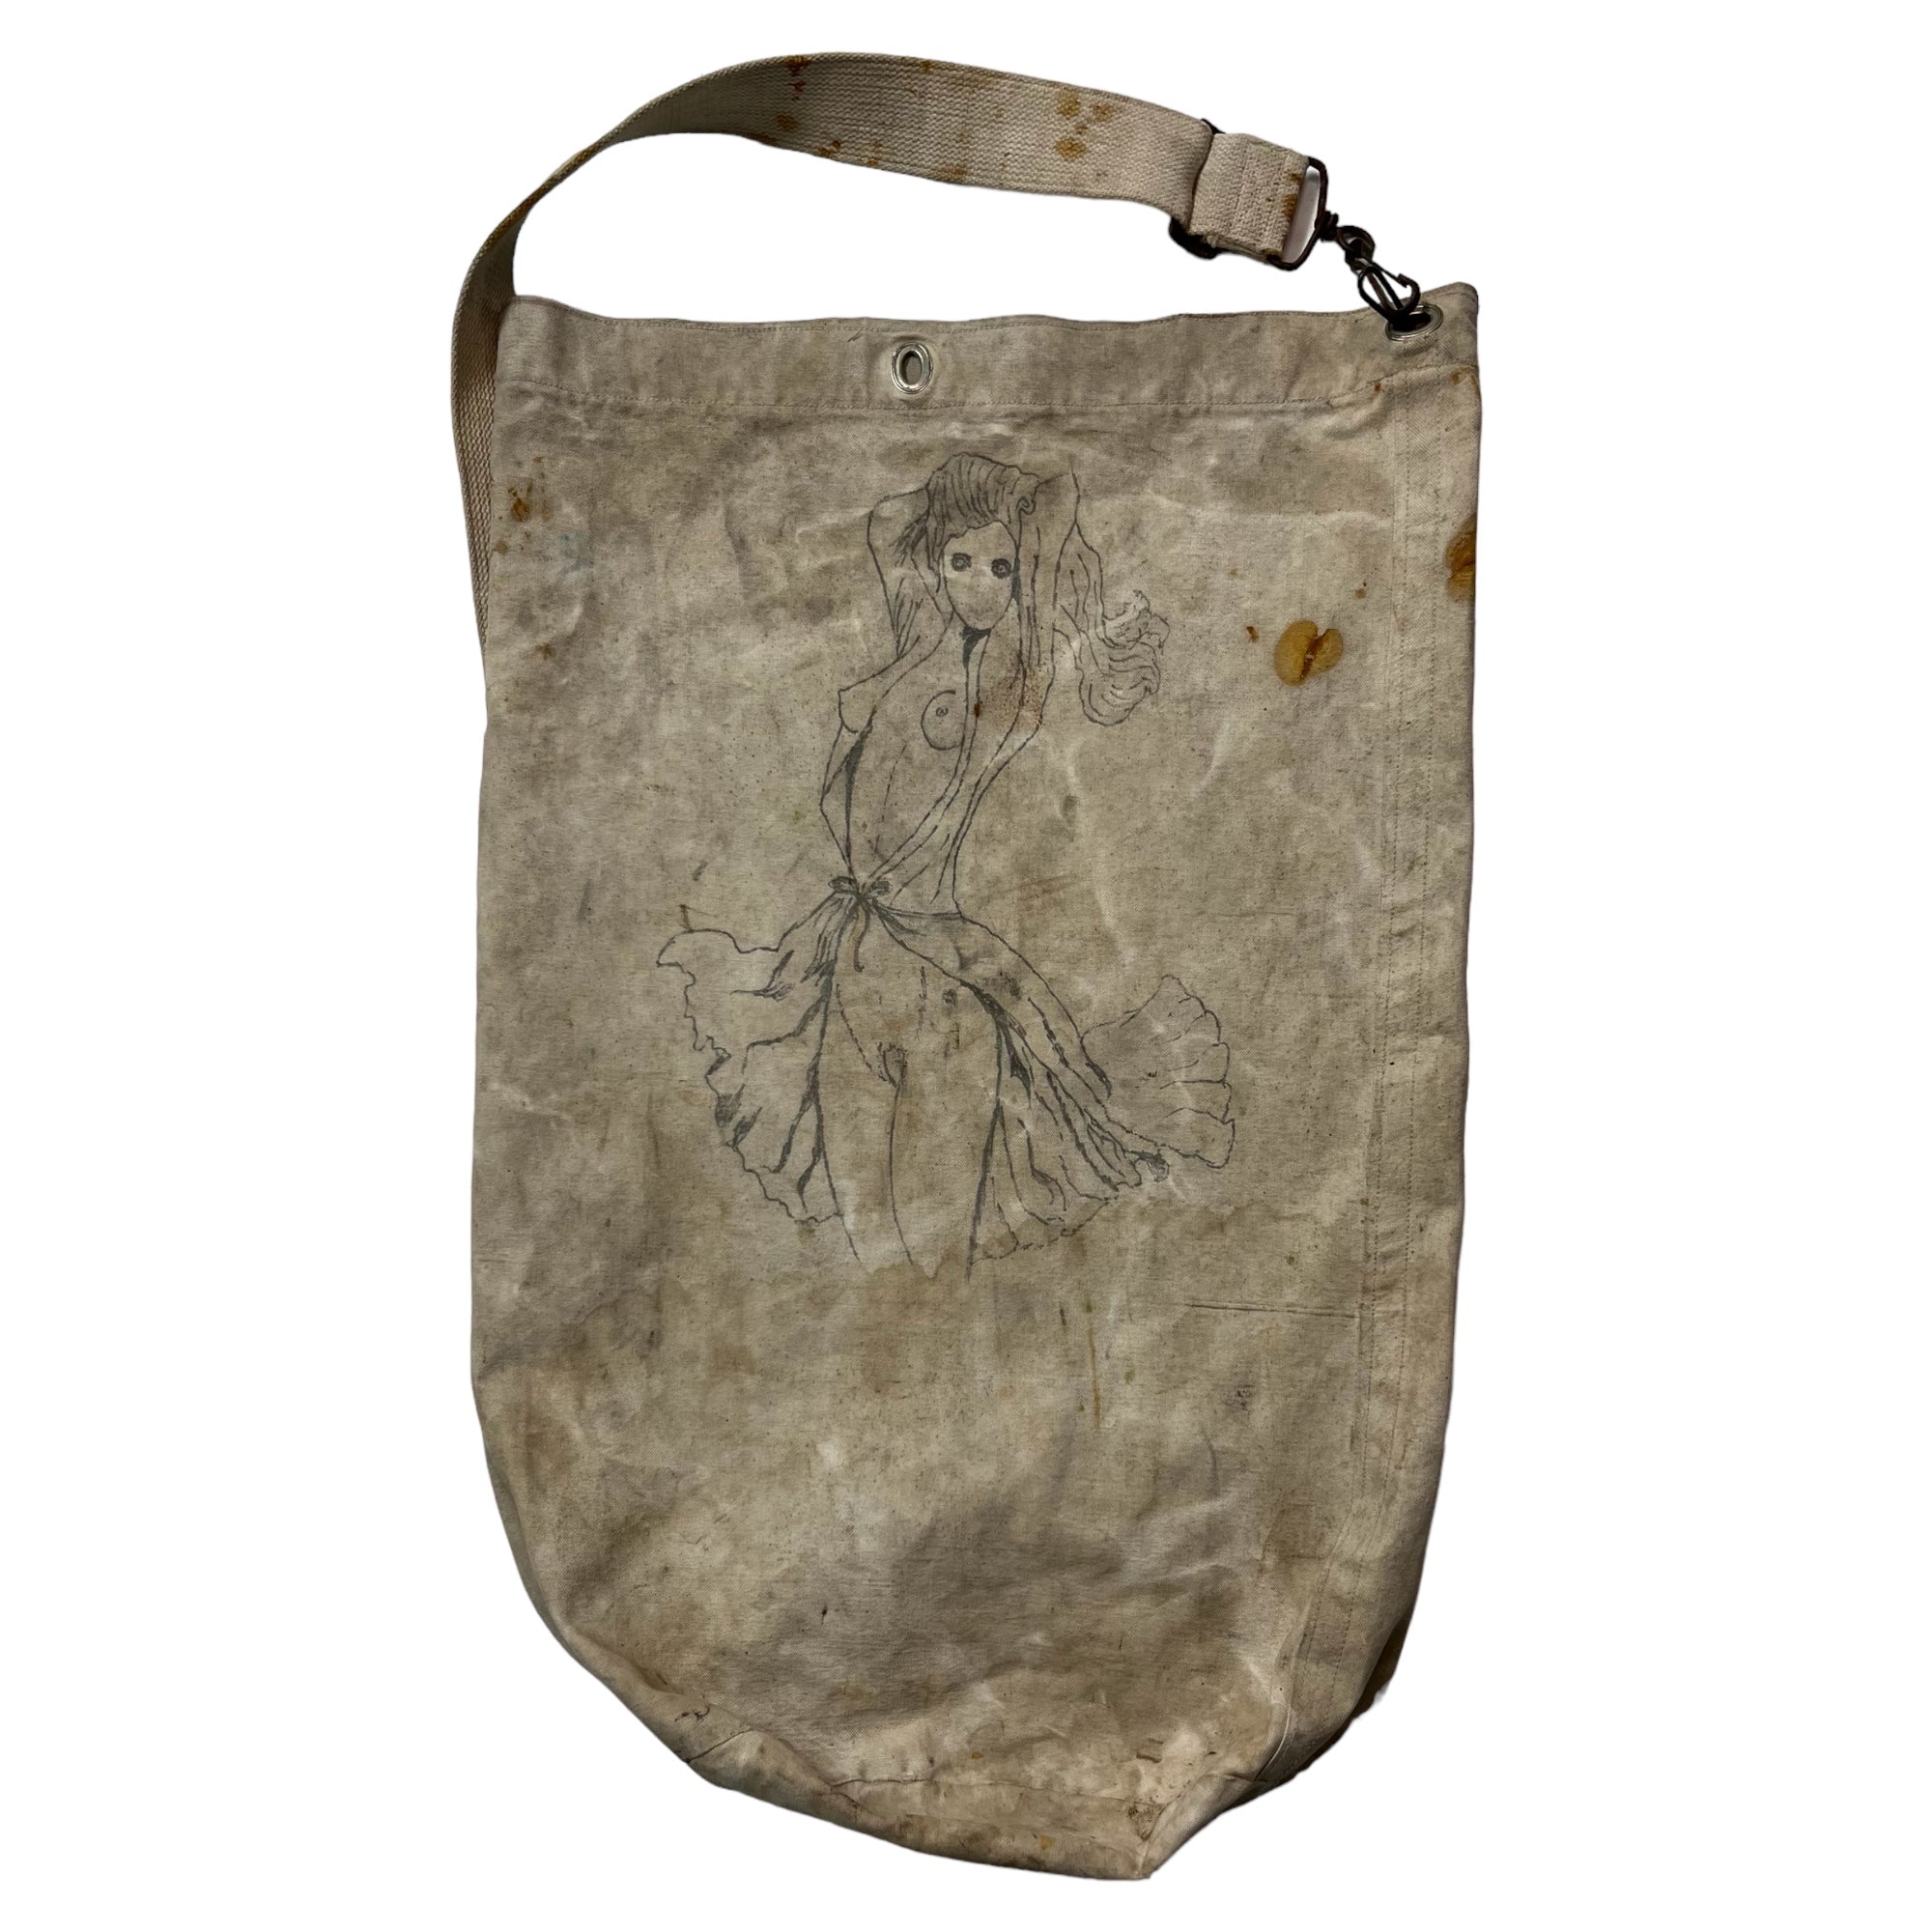 Vintage Canvas Military Duffle/Laundry Bag with Hand Drawn Female Figure - Trench Art